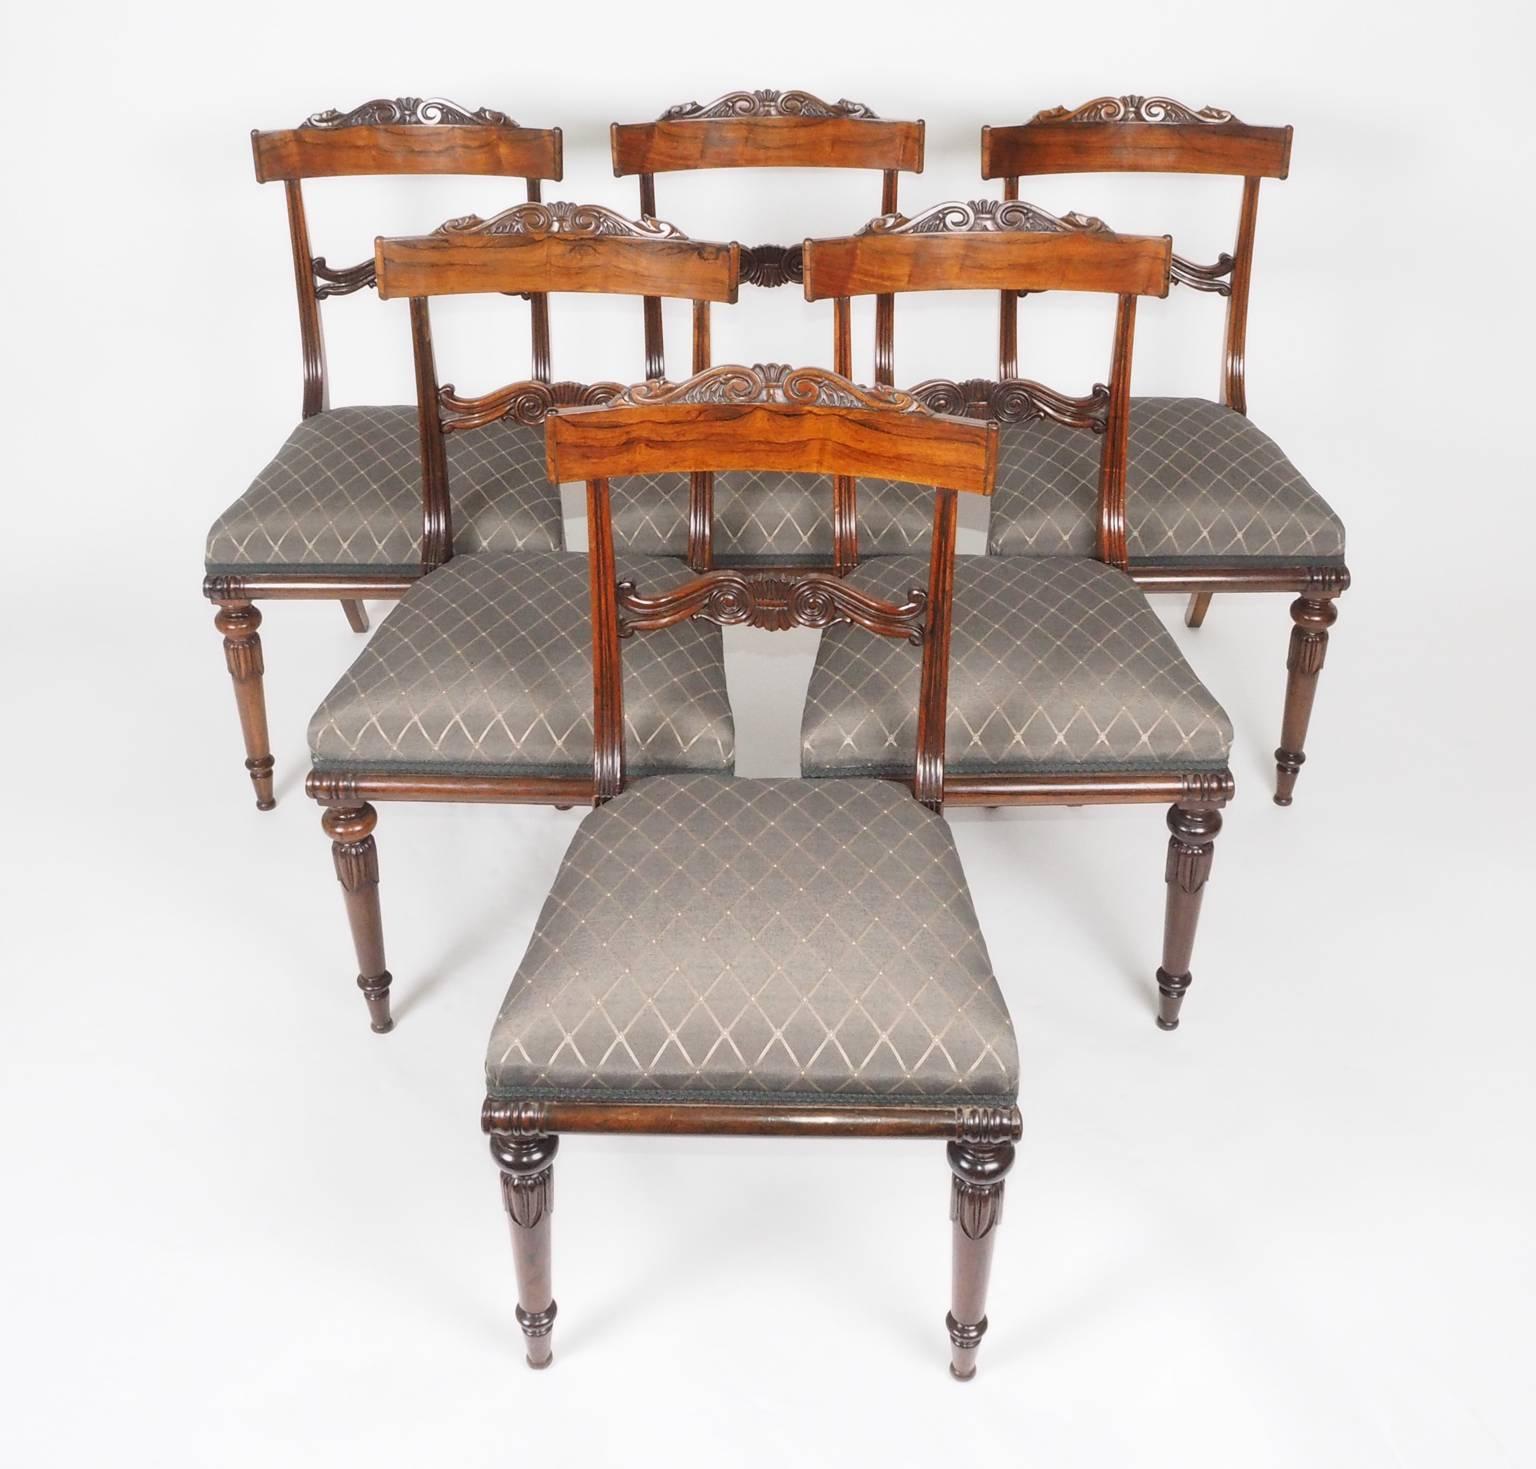 Six finely carved rosewood dining chairs, with typical crisp Gillows details and bearing two journeyman stamps 'TC'. Gillows allowed their journeyman chairmakers to stamp or sign their chairs.
 